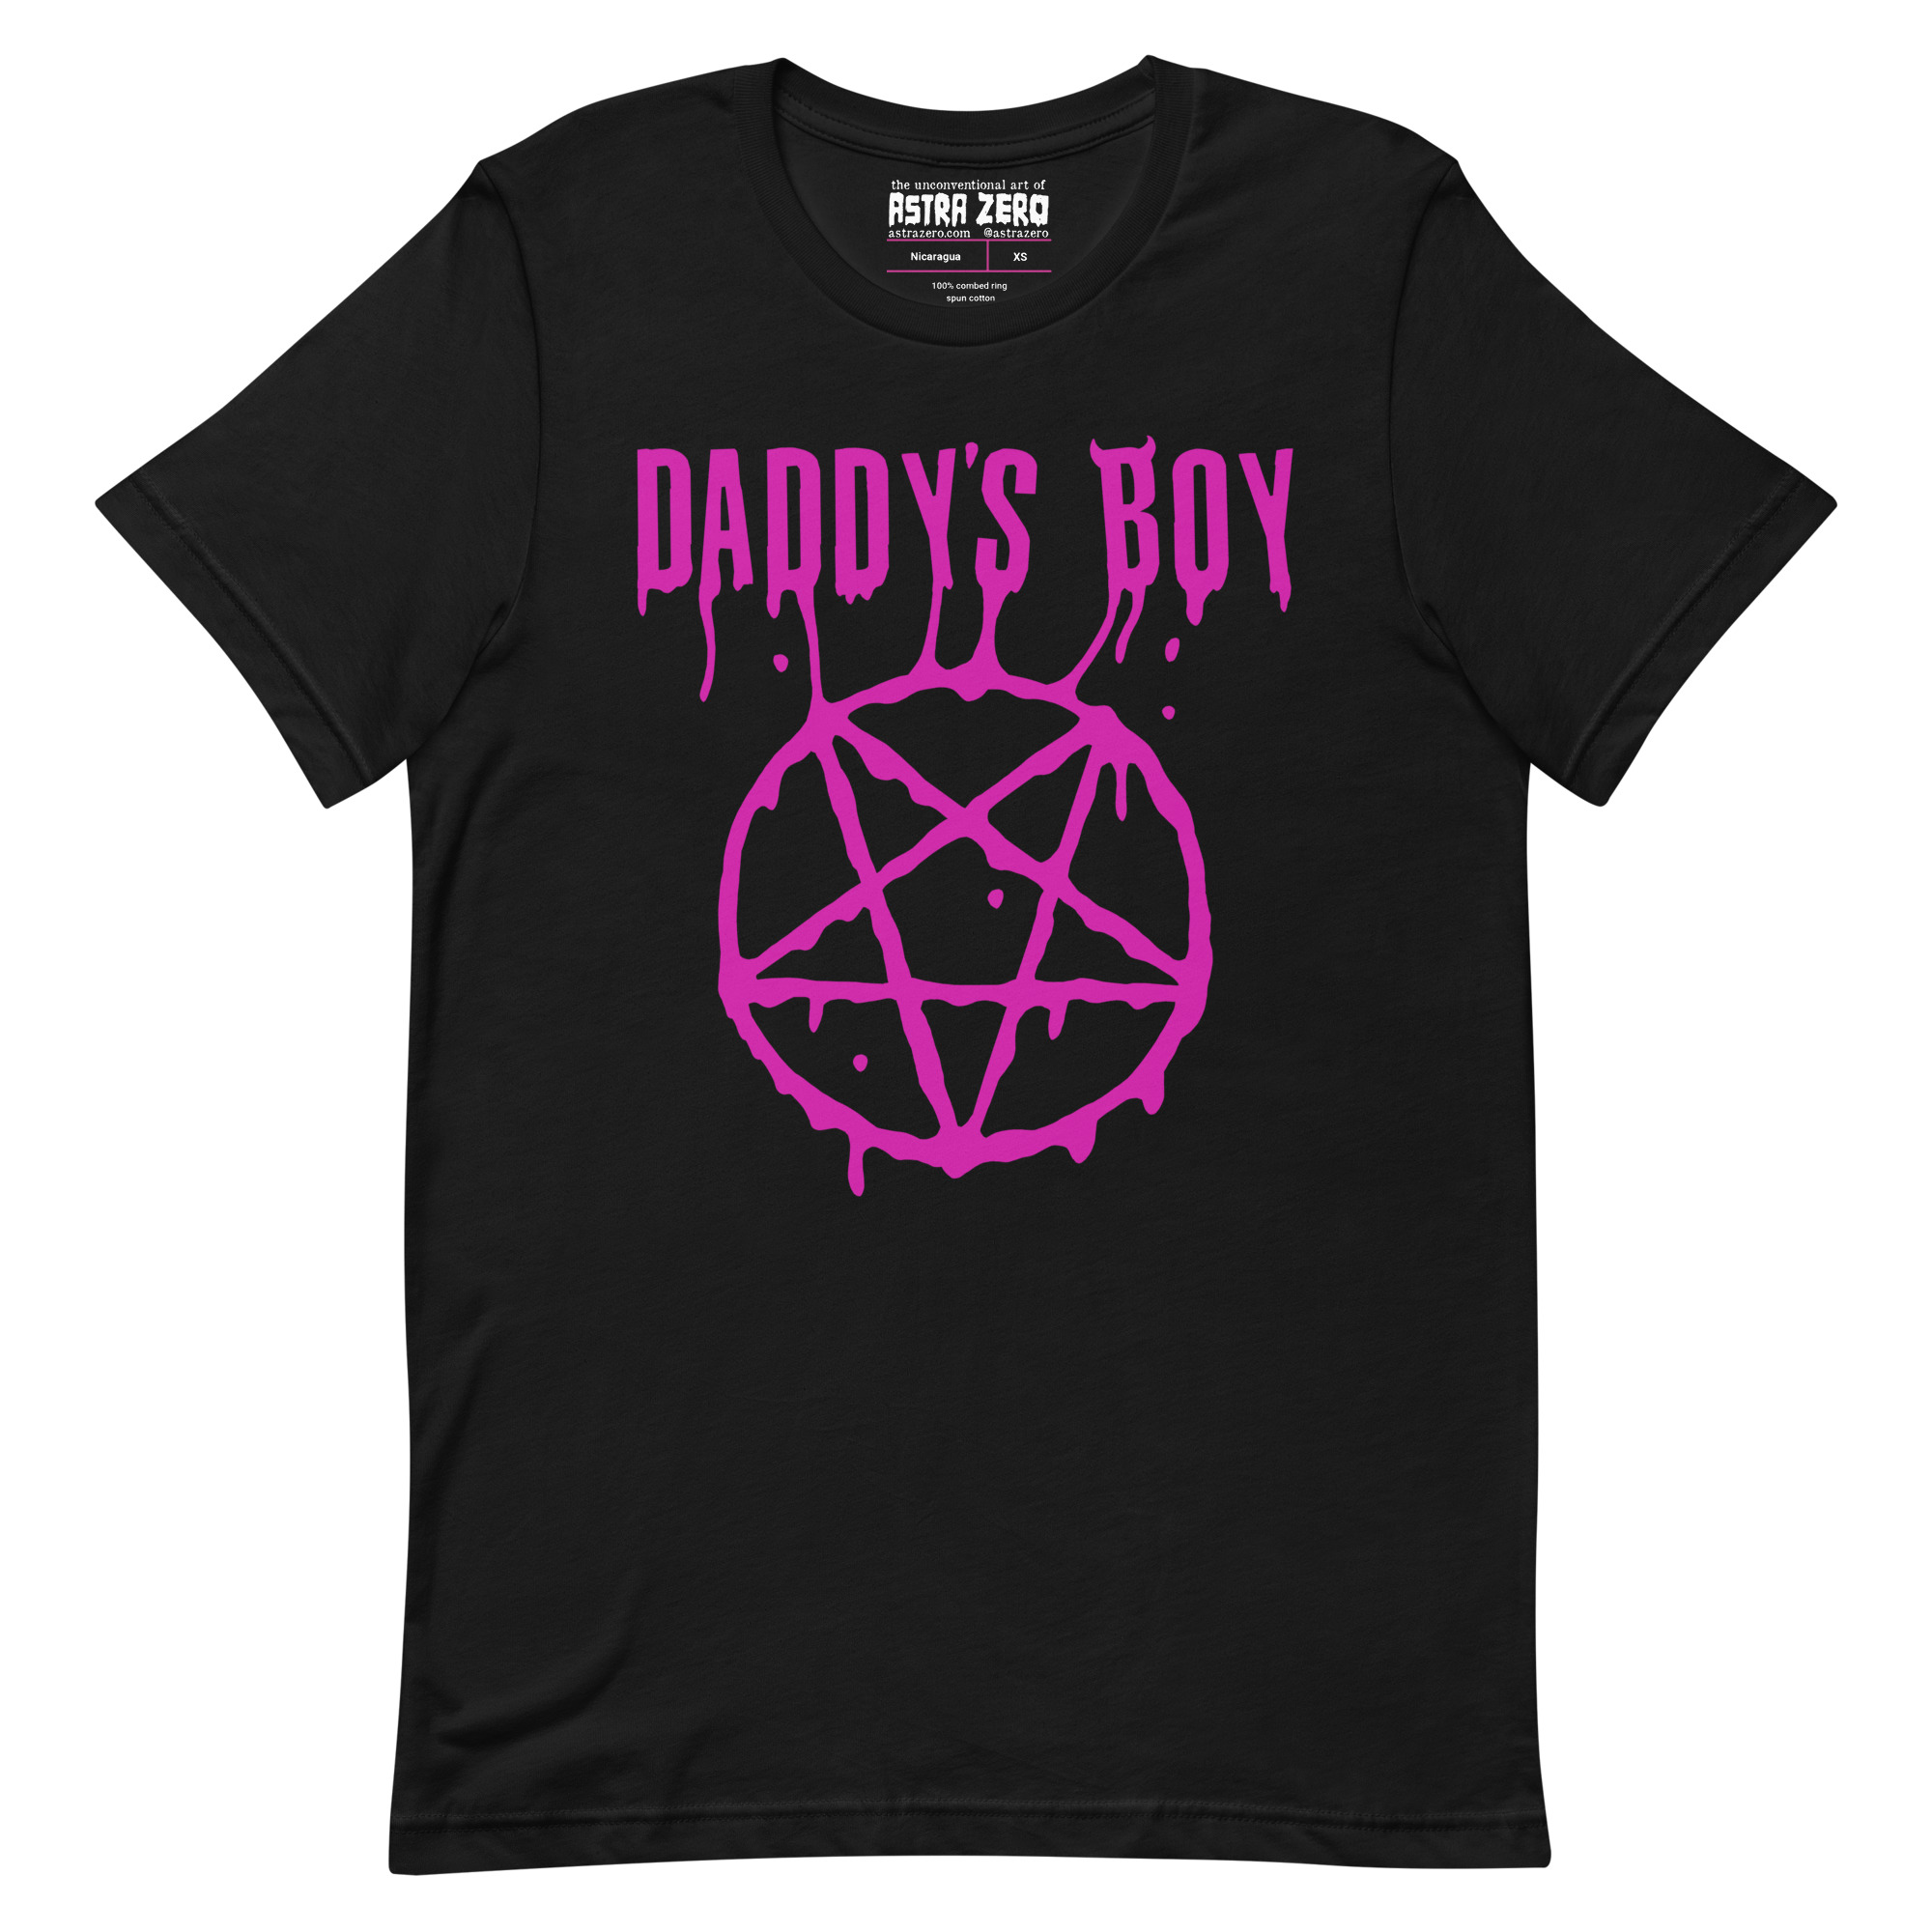 Featured image for “Daddy’s Boy - Short-Sleeve Unisex T-Shirt”